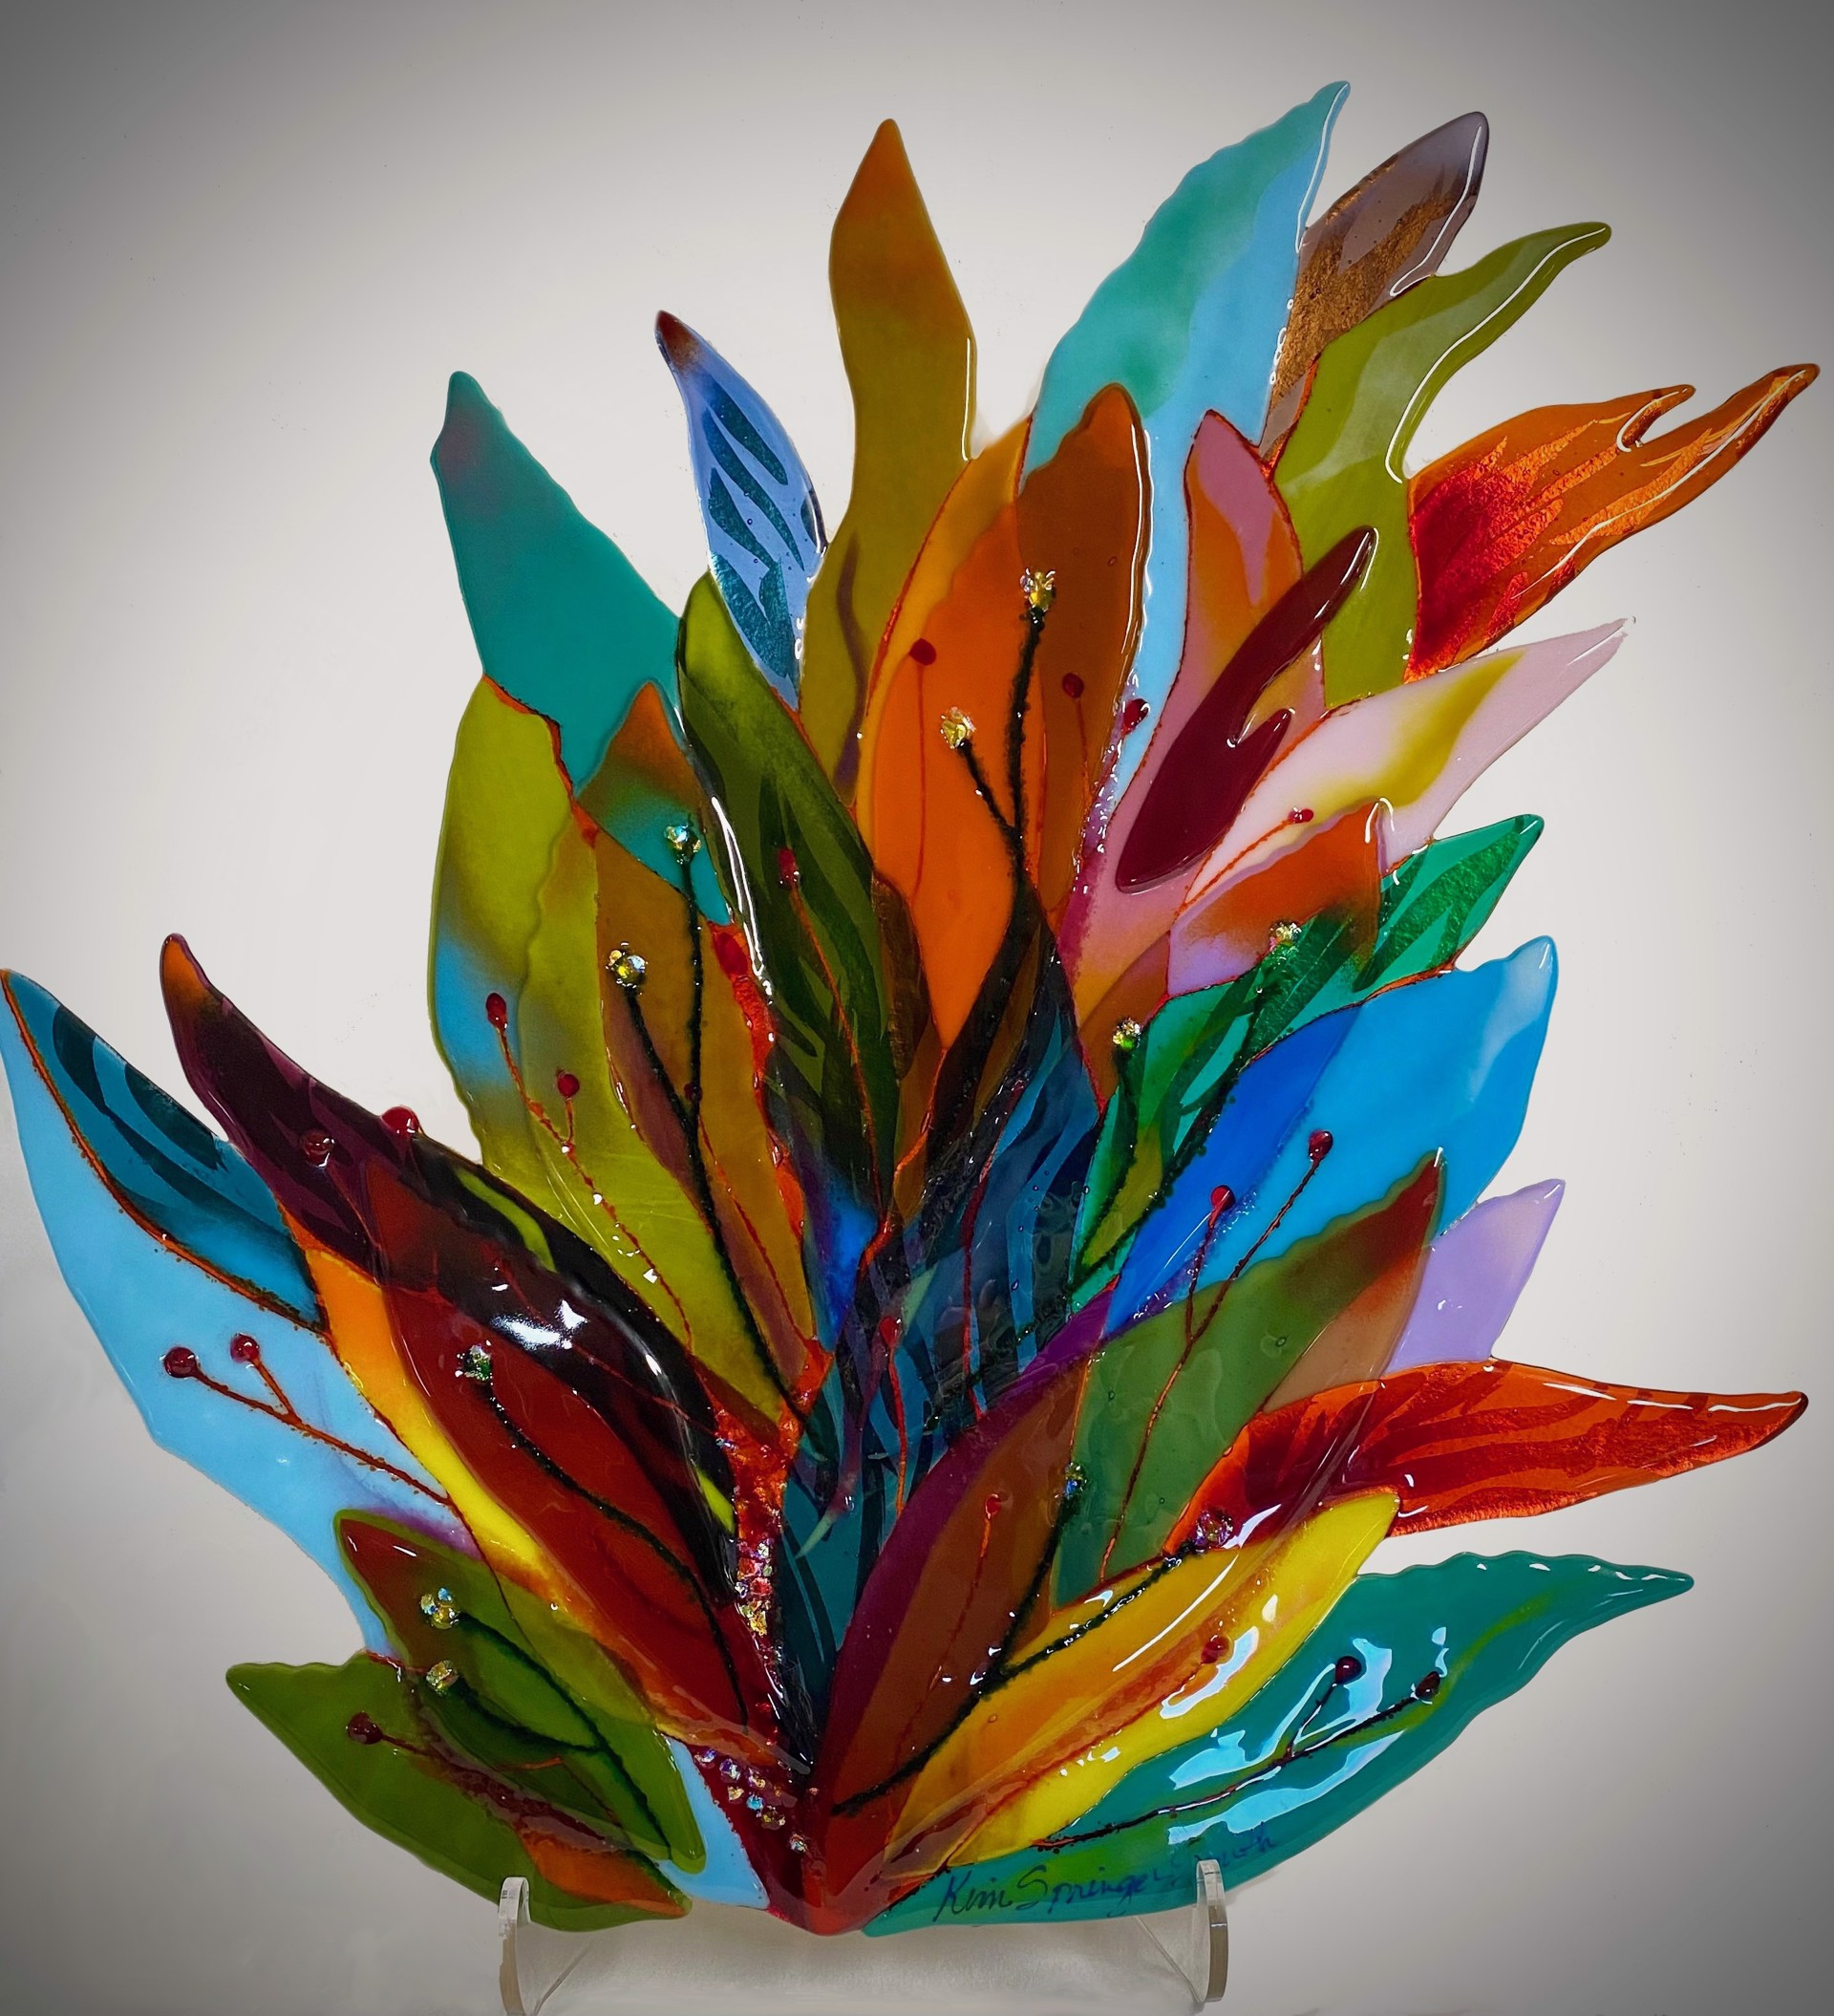 Agave Flame by Kim Springer-Smith